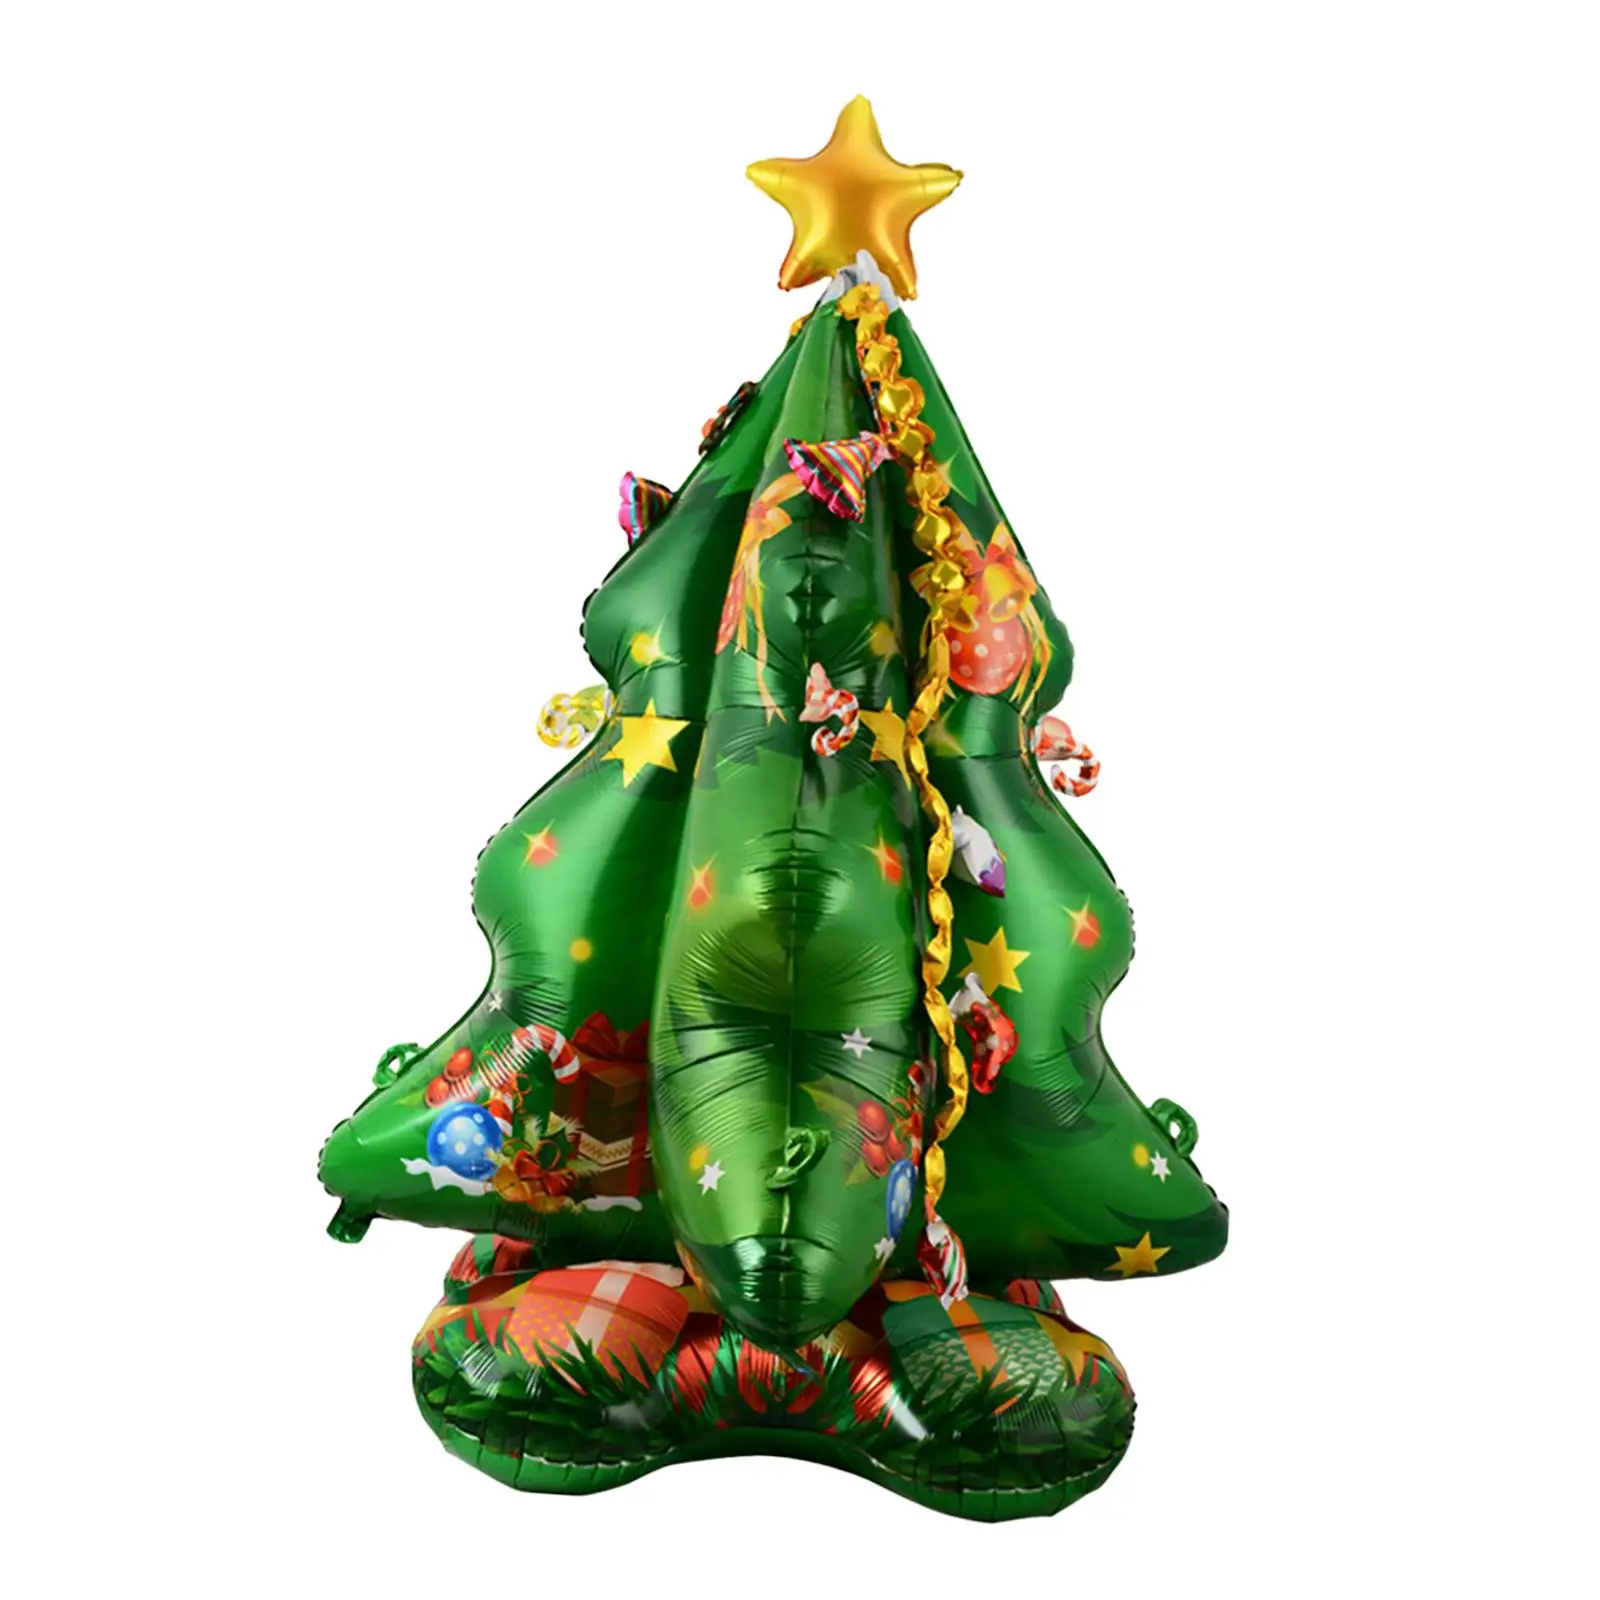 Large Christmas Balloon Toy Decorative Novelty Aluminum Film Standing Balloon for Party Supplies Home Decor Holiday Garden